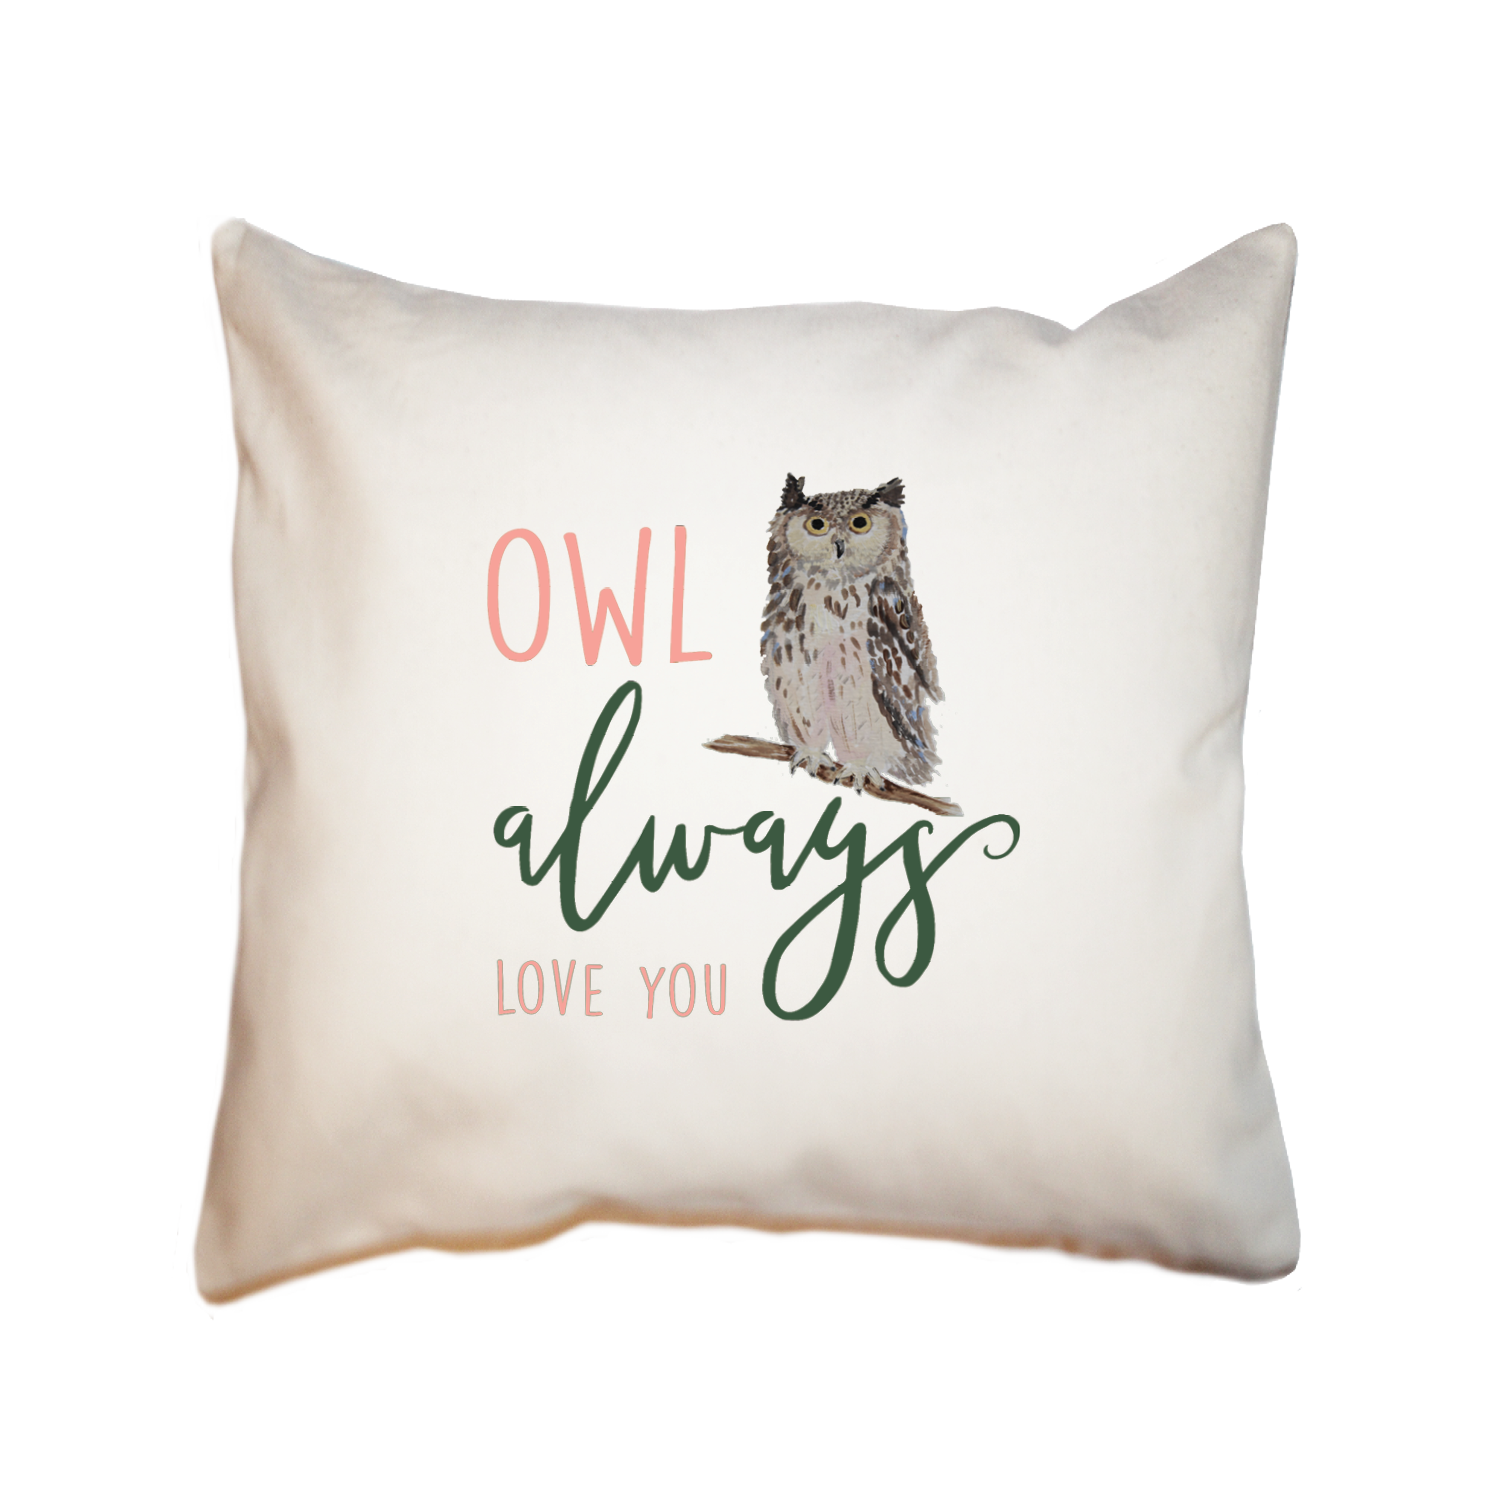 owl always love you square pillow